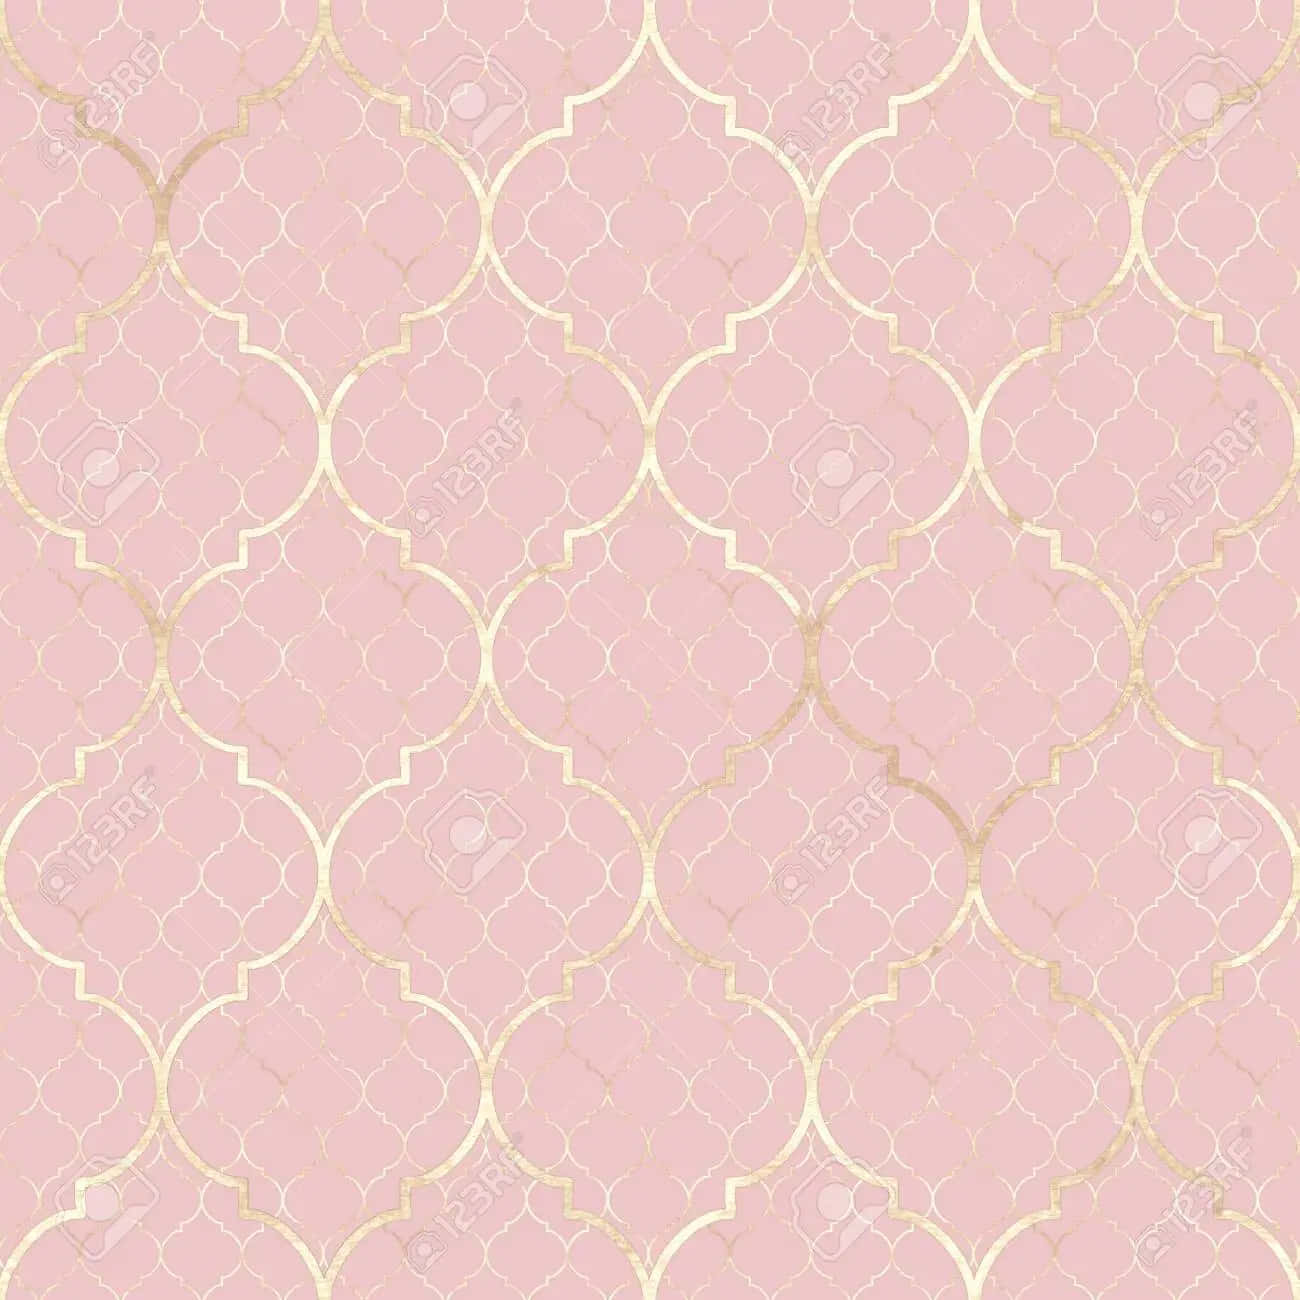 A bright and shiny combination of light pink and golden colors Wallpaper